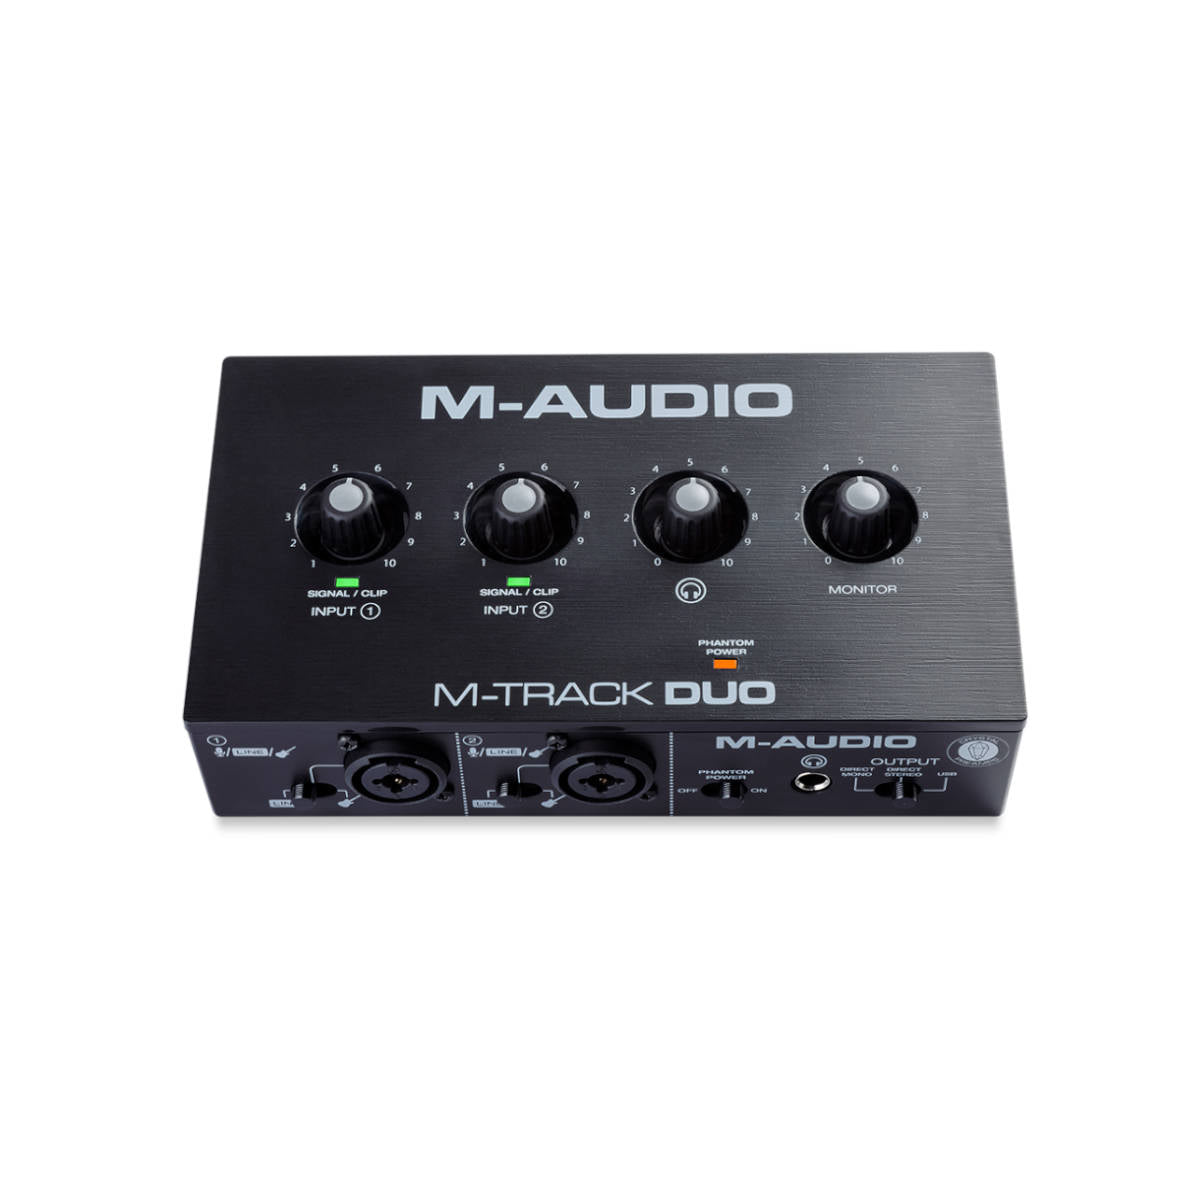 M-Audio M-Track Duo USB Audio Interface with 2 Combo Inputs with Crystal Preamps, and Phantom Power - Ooberpad India